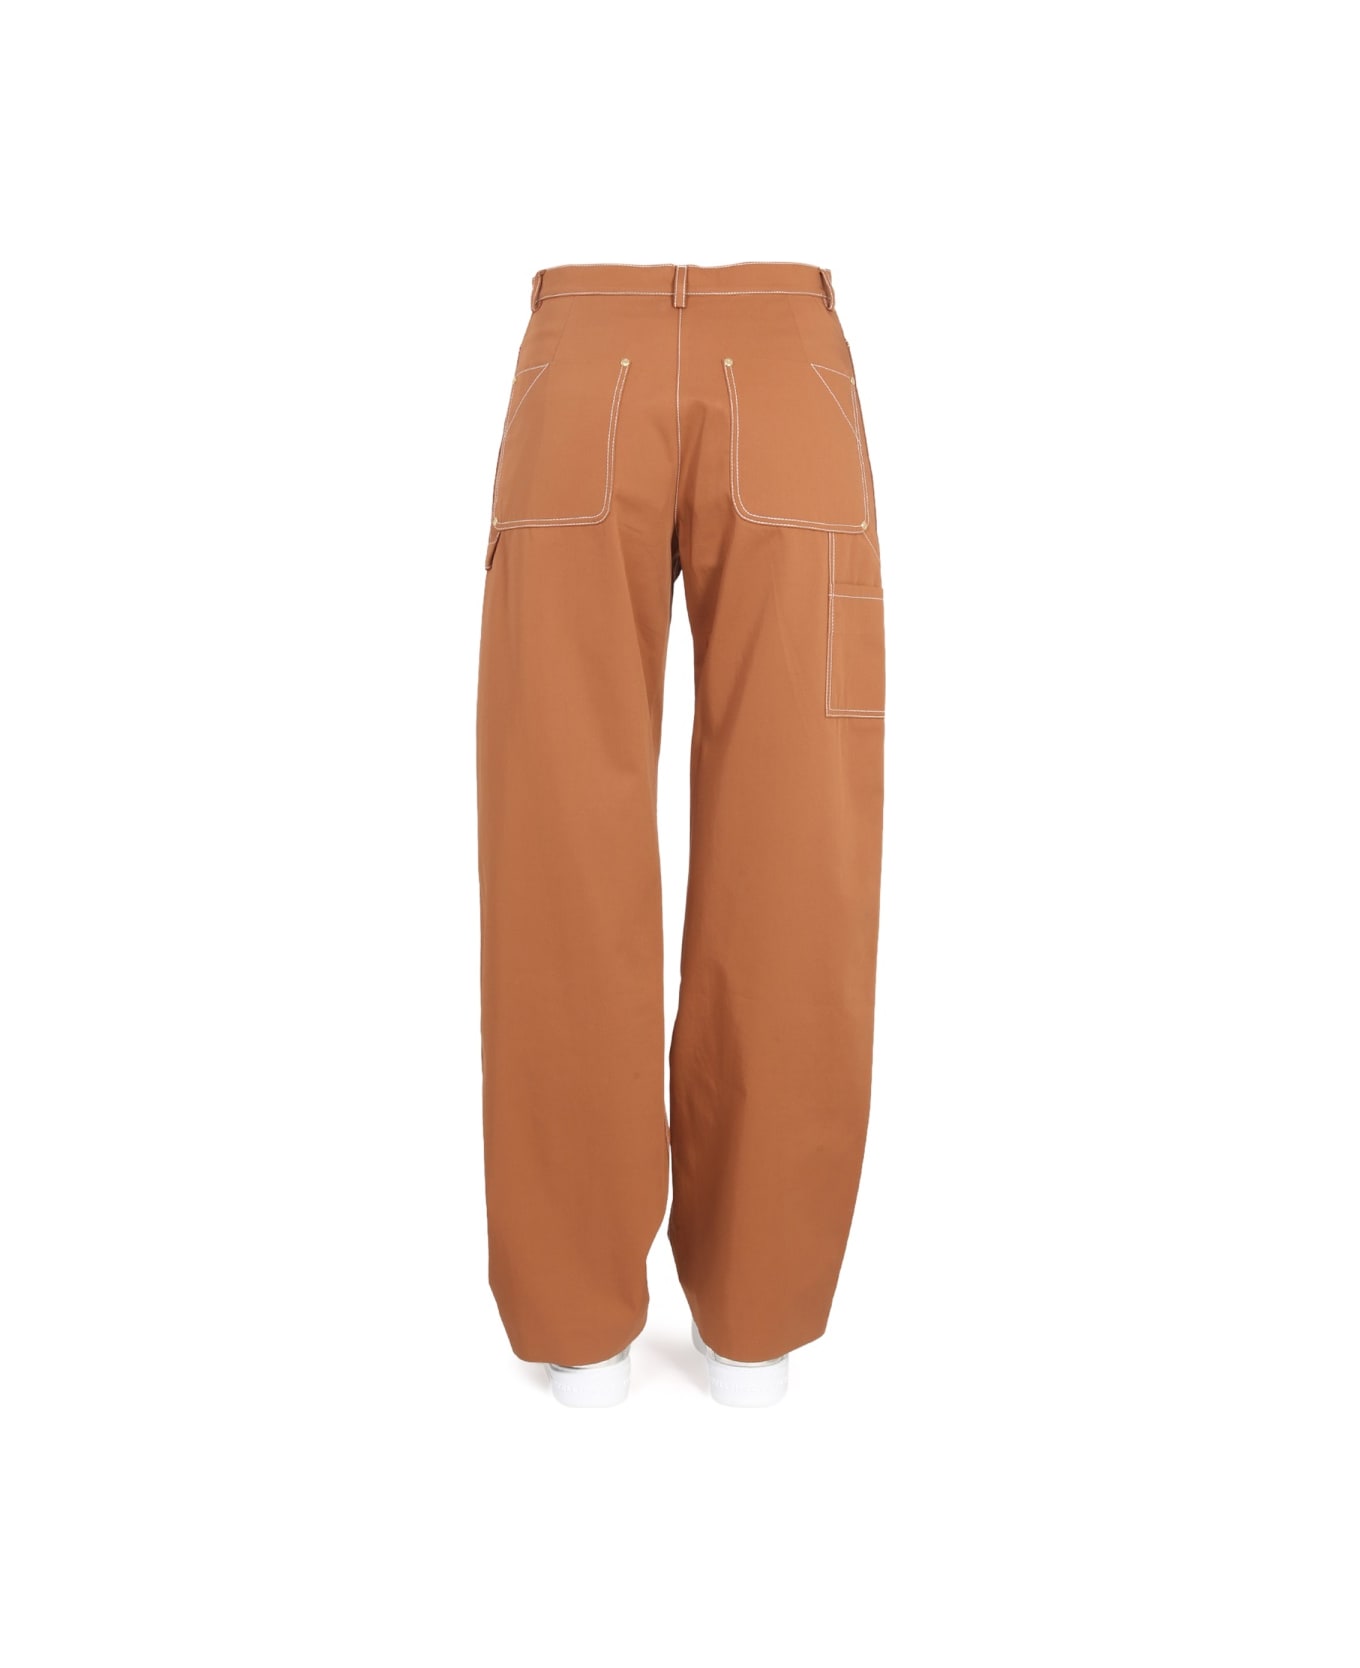 Stella McCartney Pants With Buckle - BROWN ボトムス